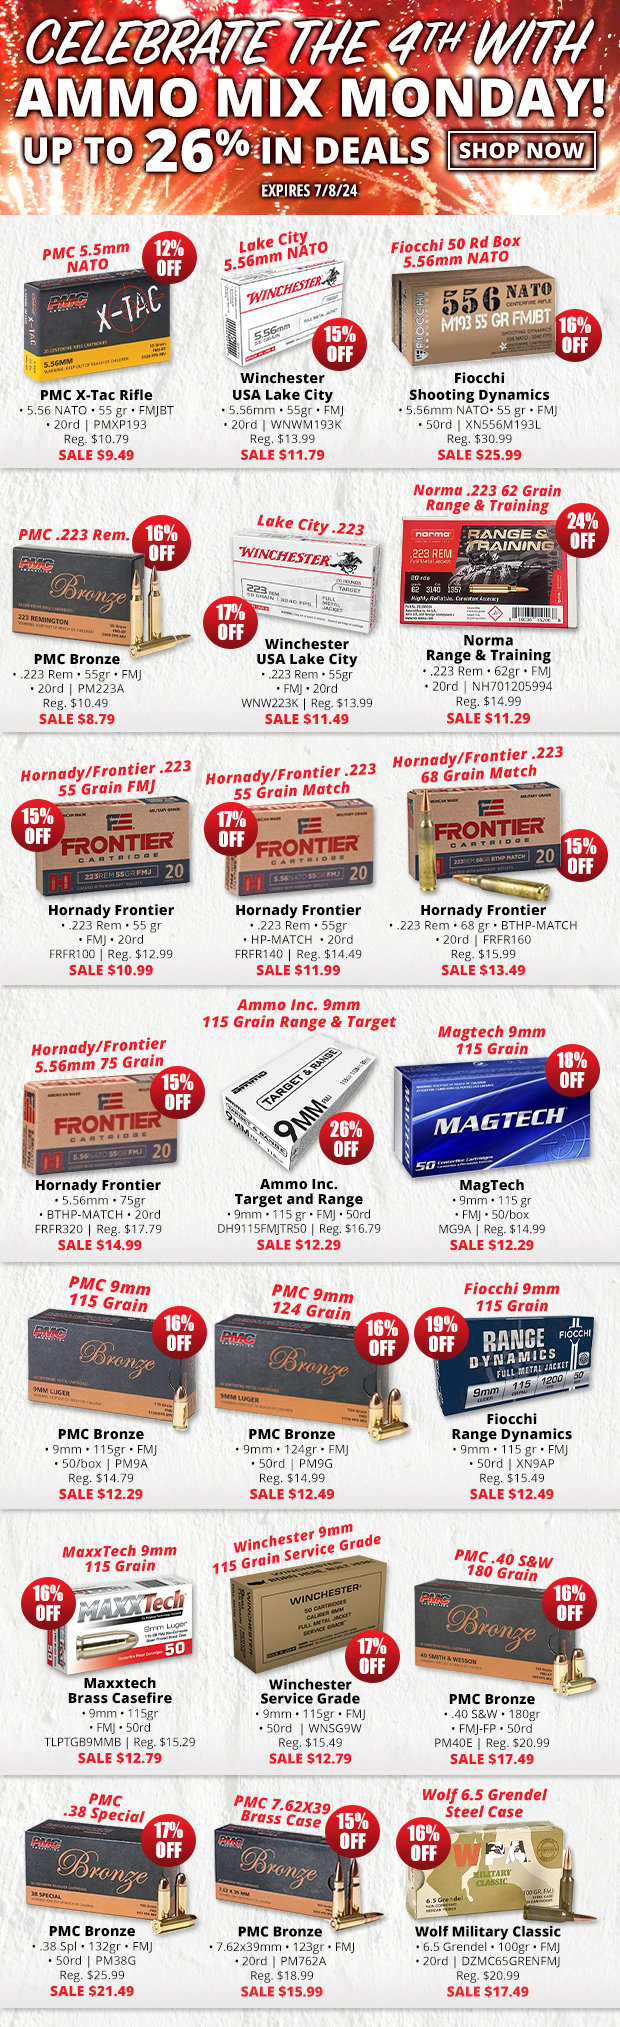 Up to 26% Off on This Ammo Mix Monday